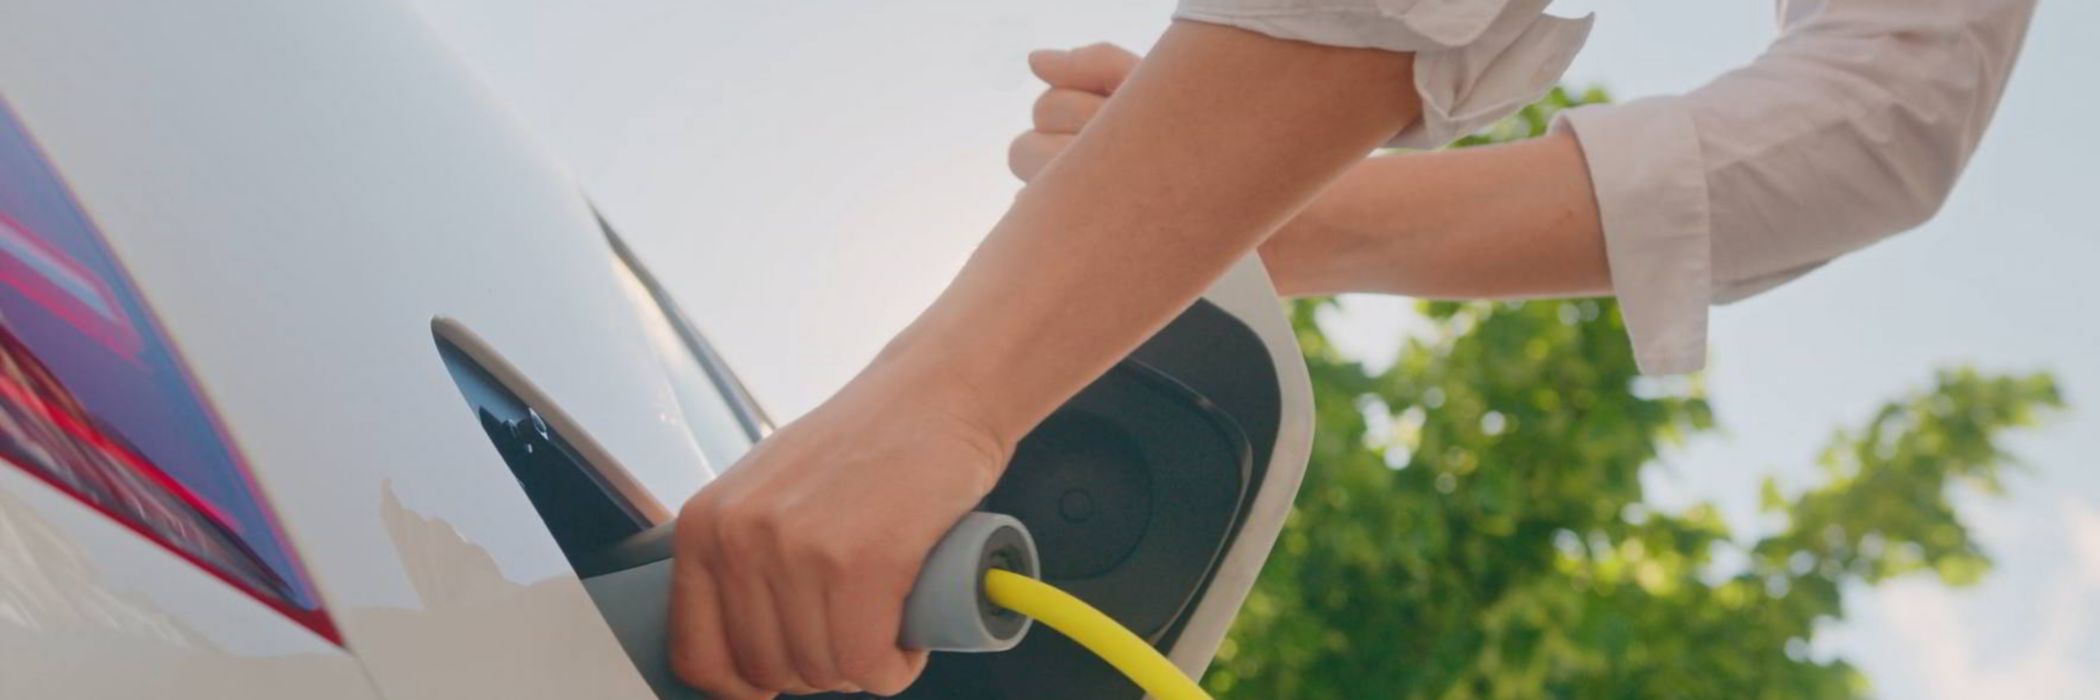 Hand plugging in electric car charger